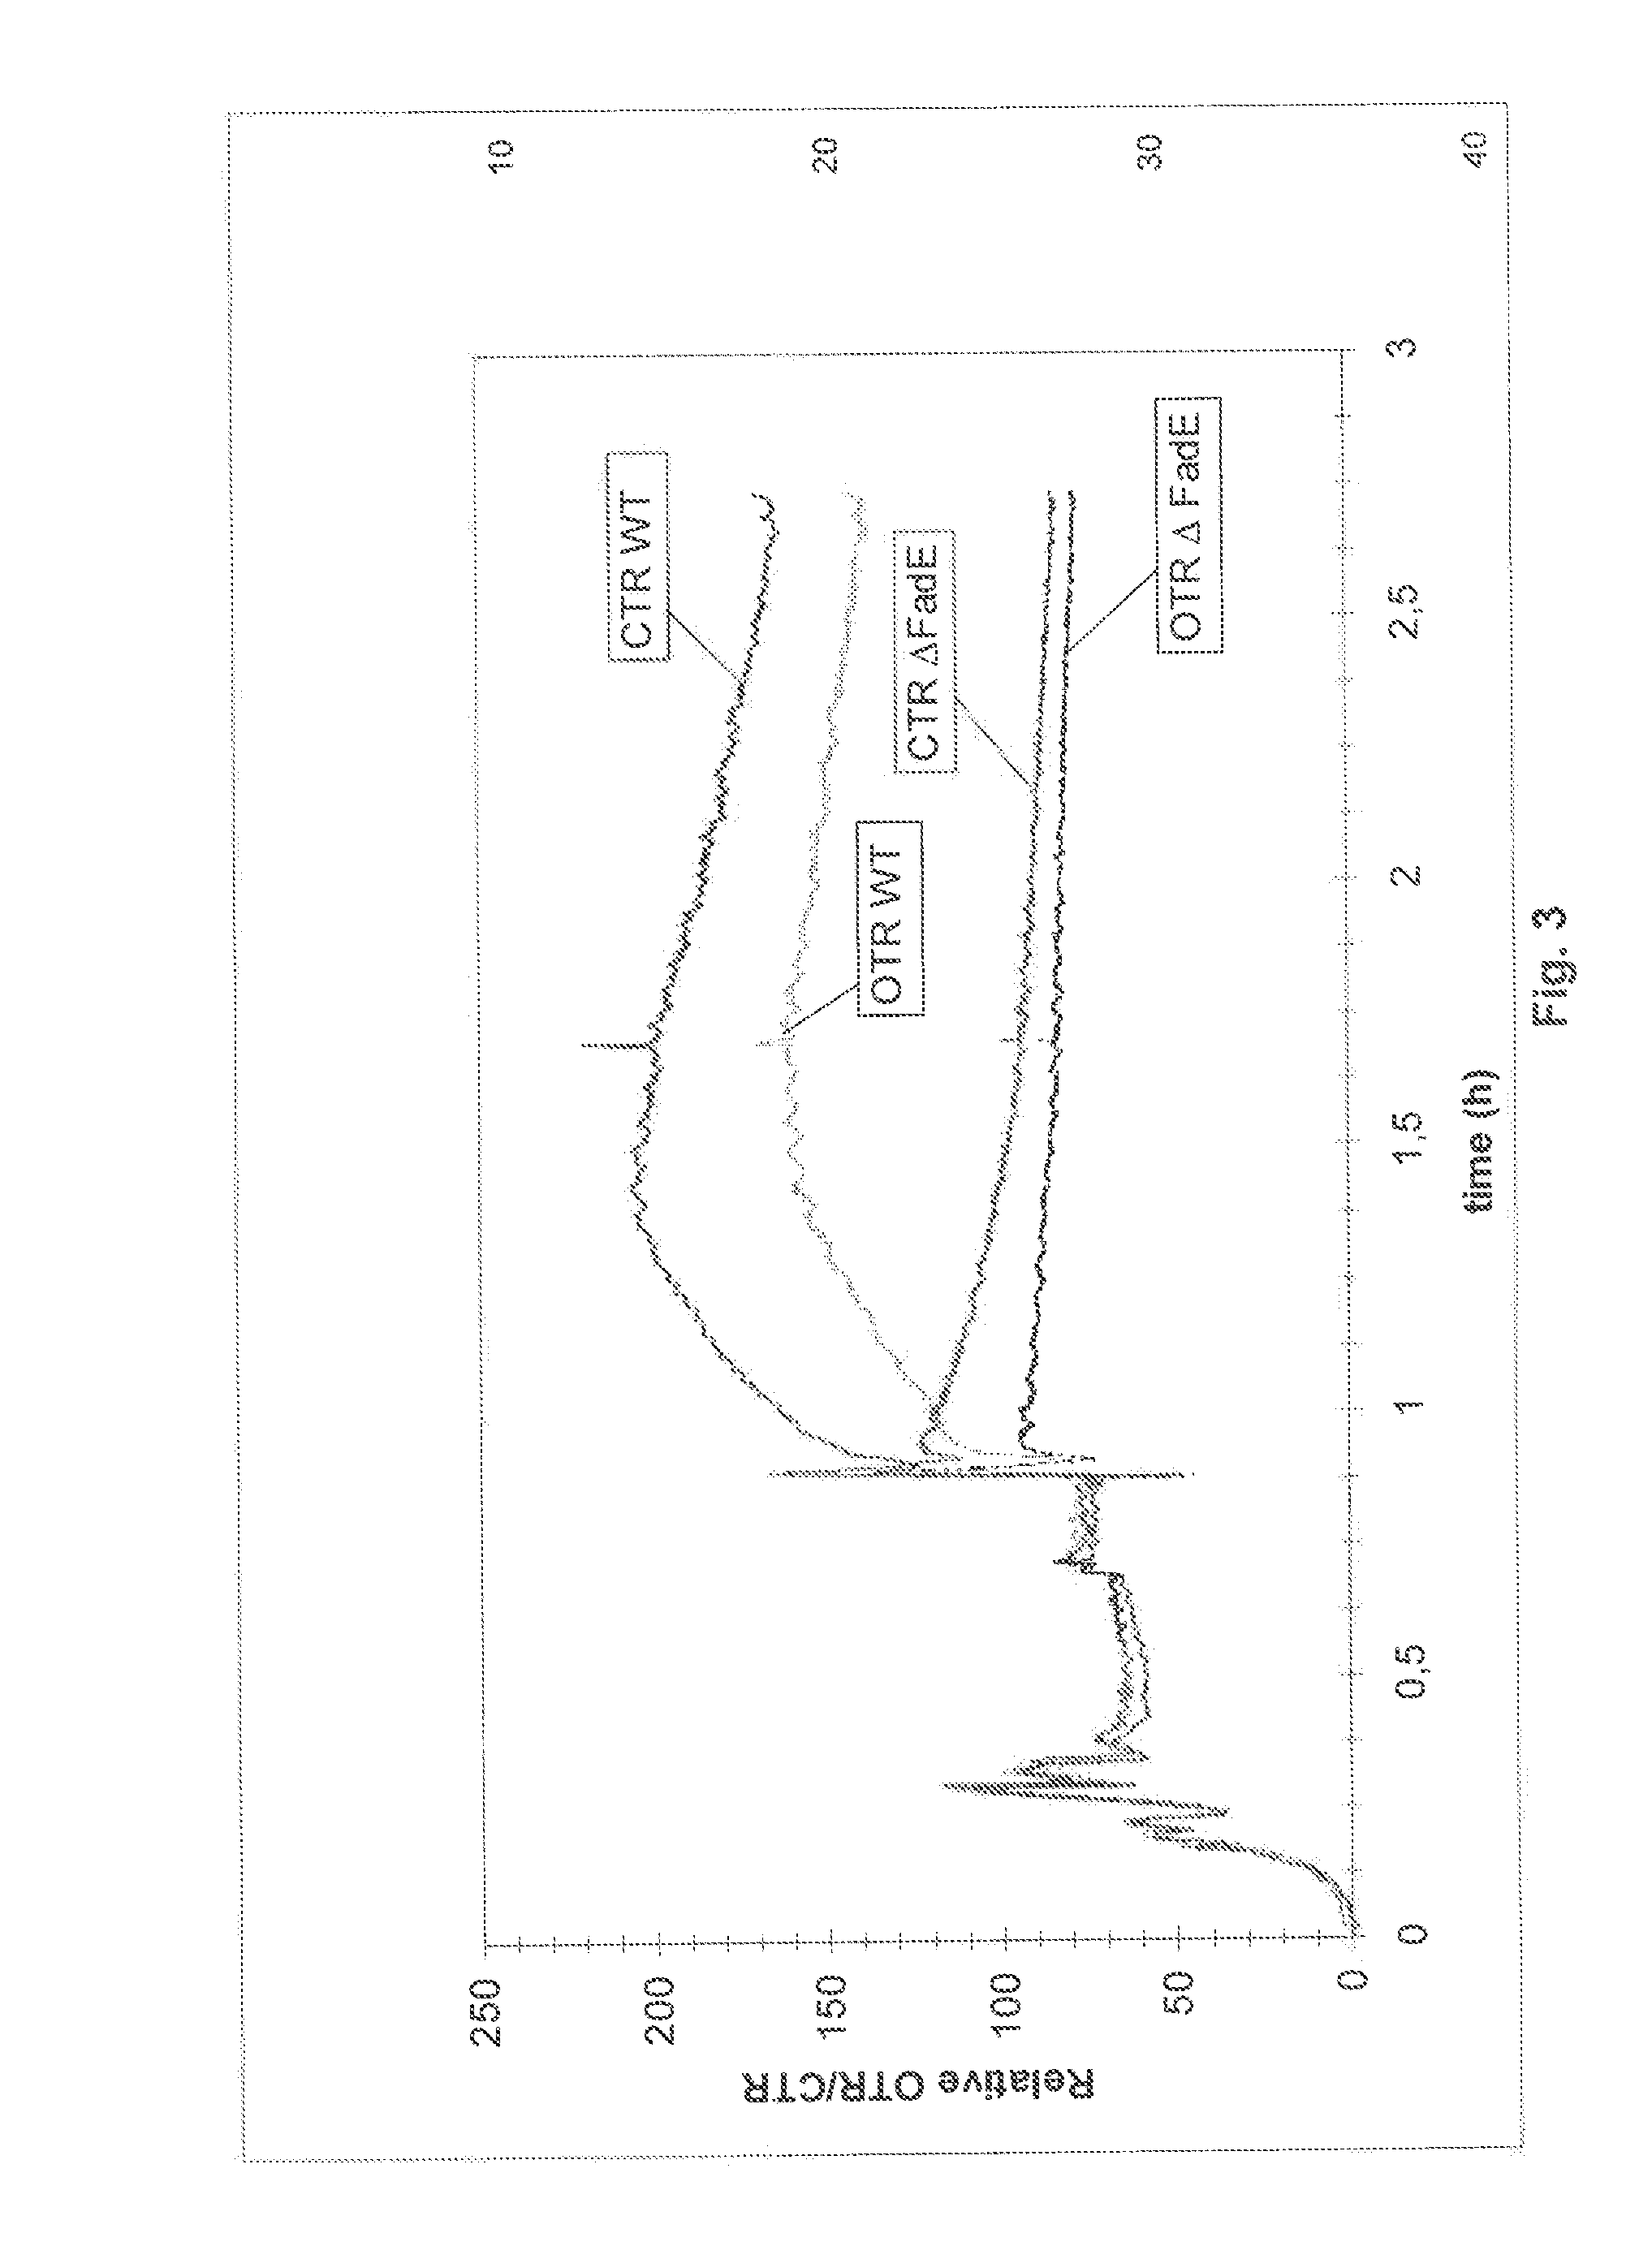 Process for the improved separation of a hydrophobic organic solution from an aqueous culture medium